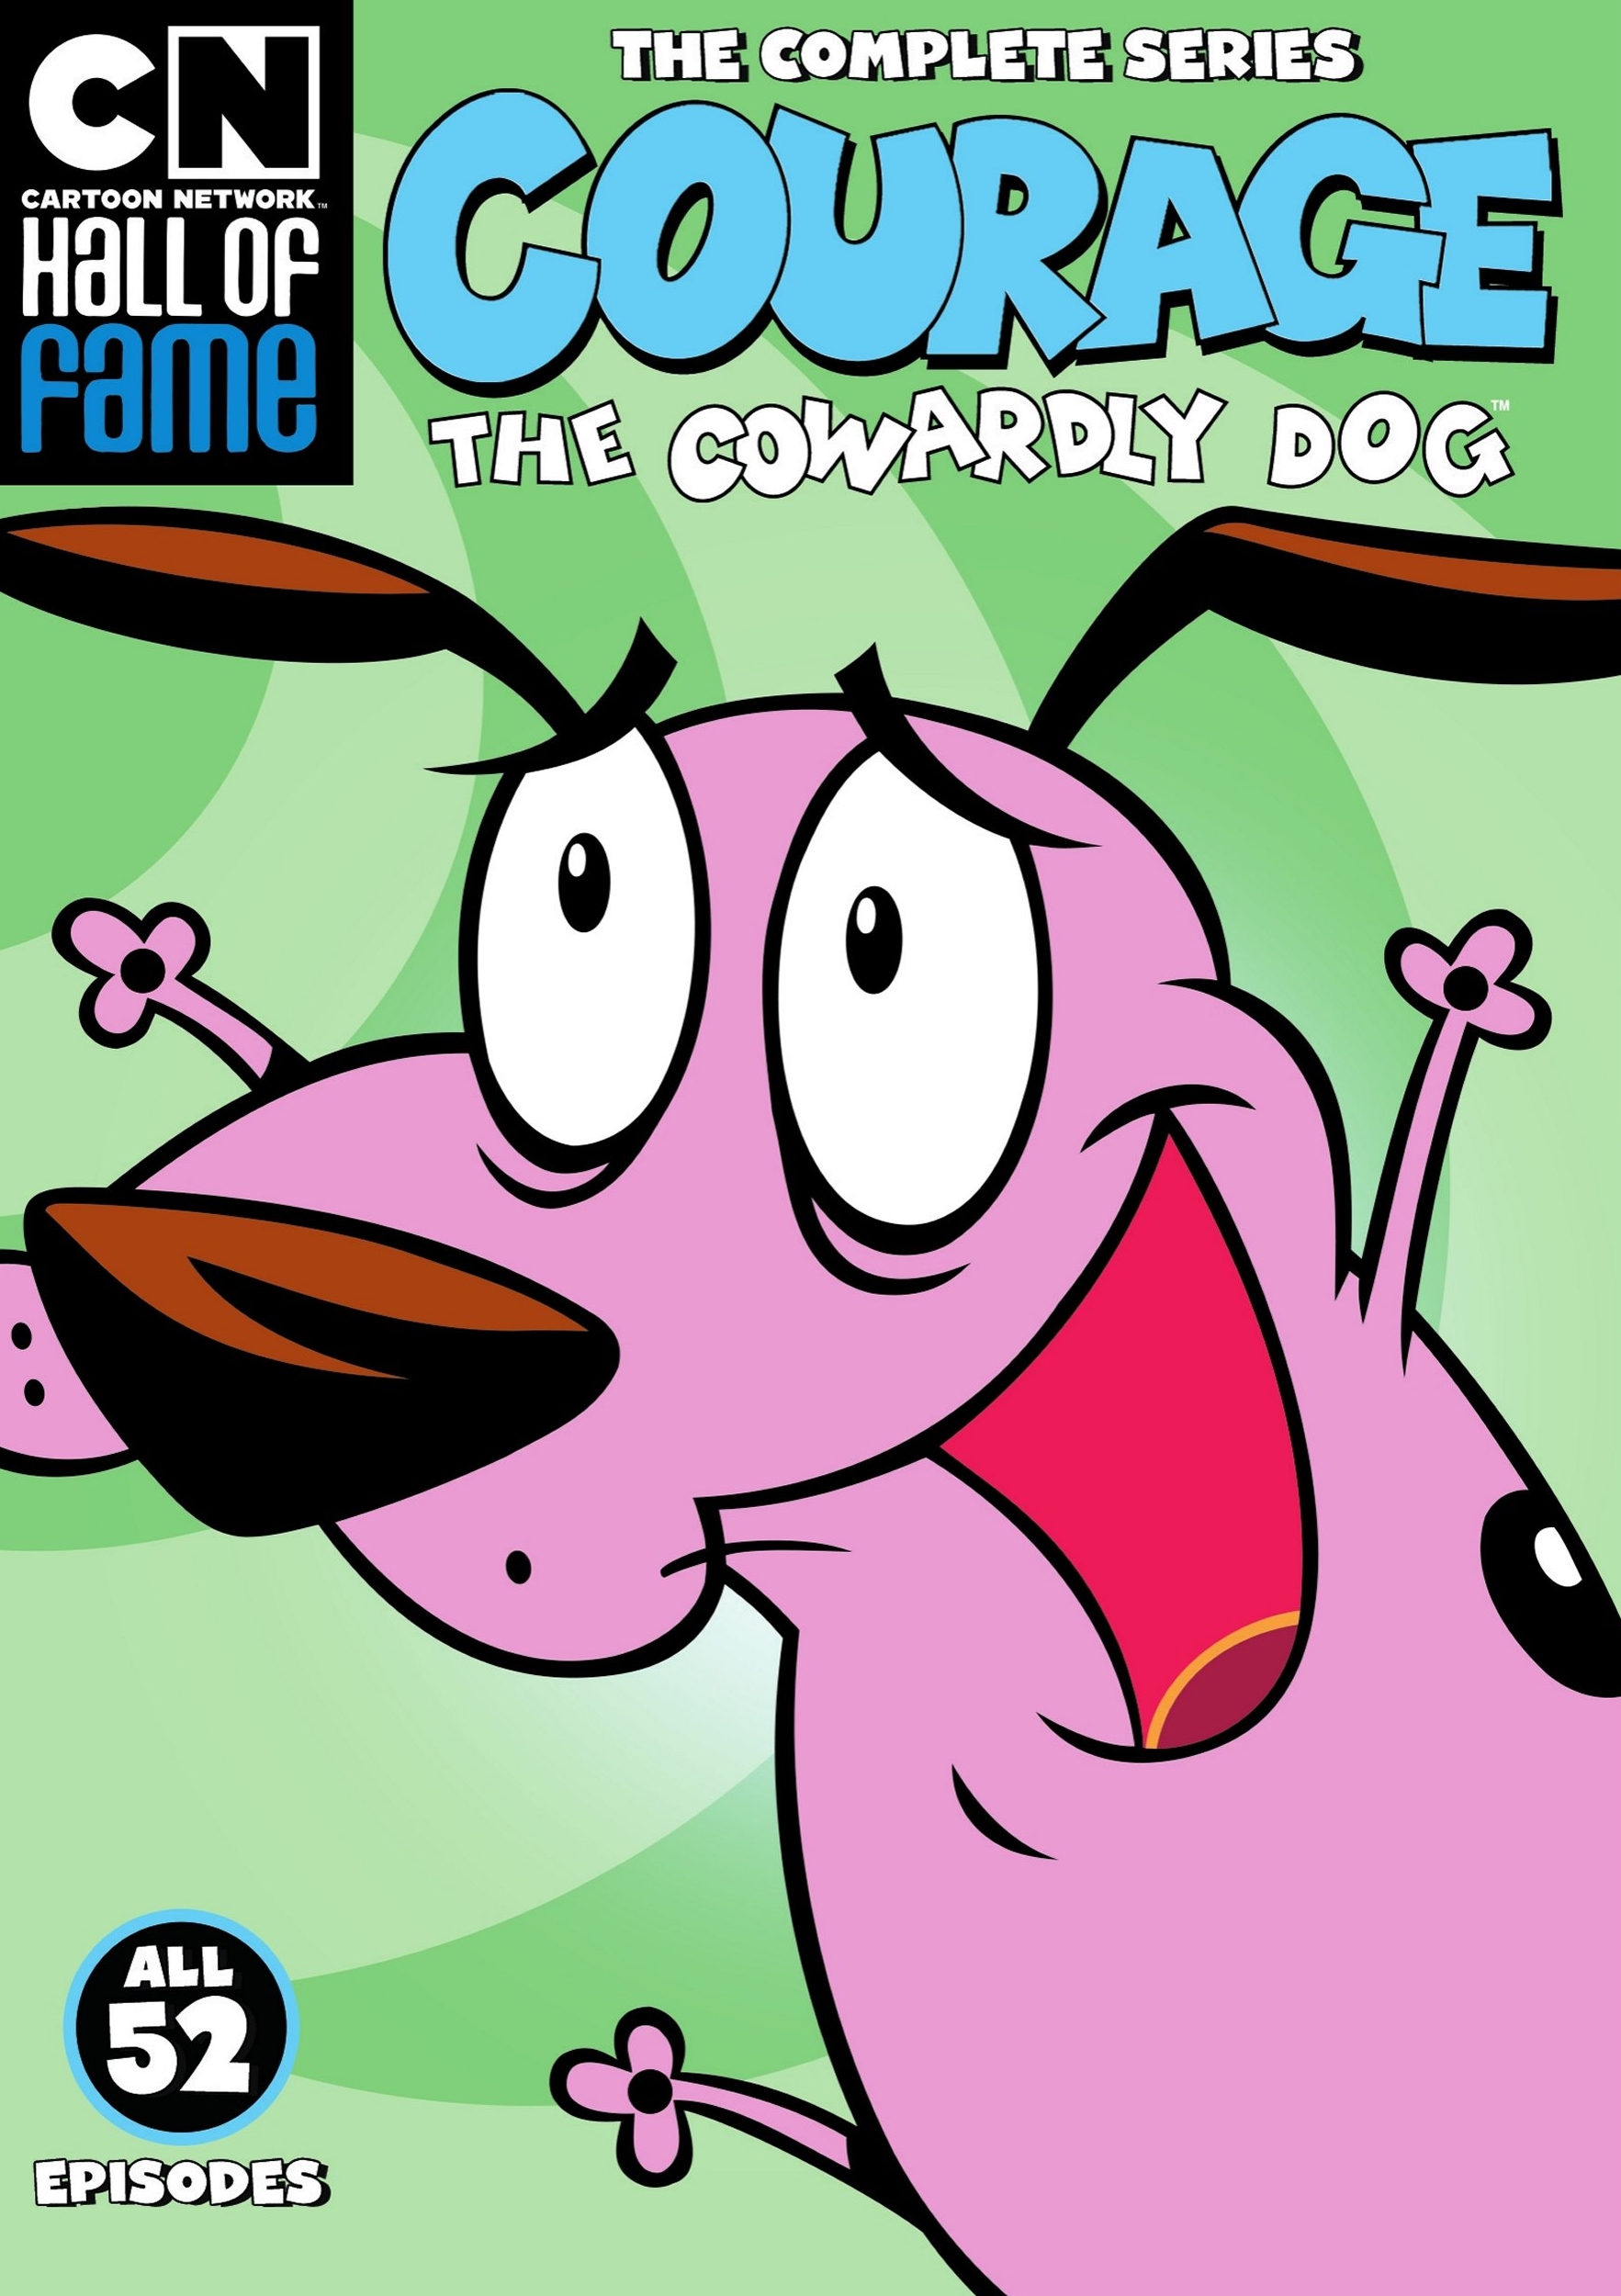 Cartoon Network Hall of Fame: Courage the Cowardly Dog The Complete Series  - Best Buy